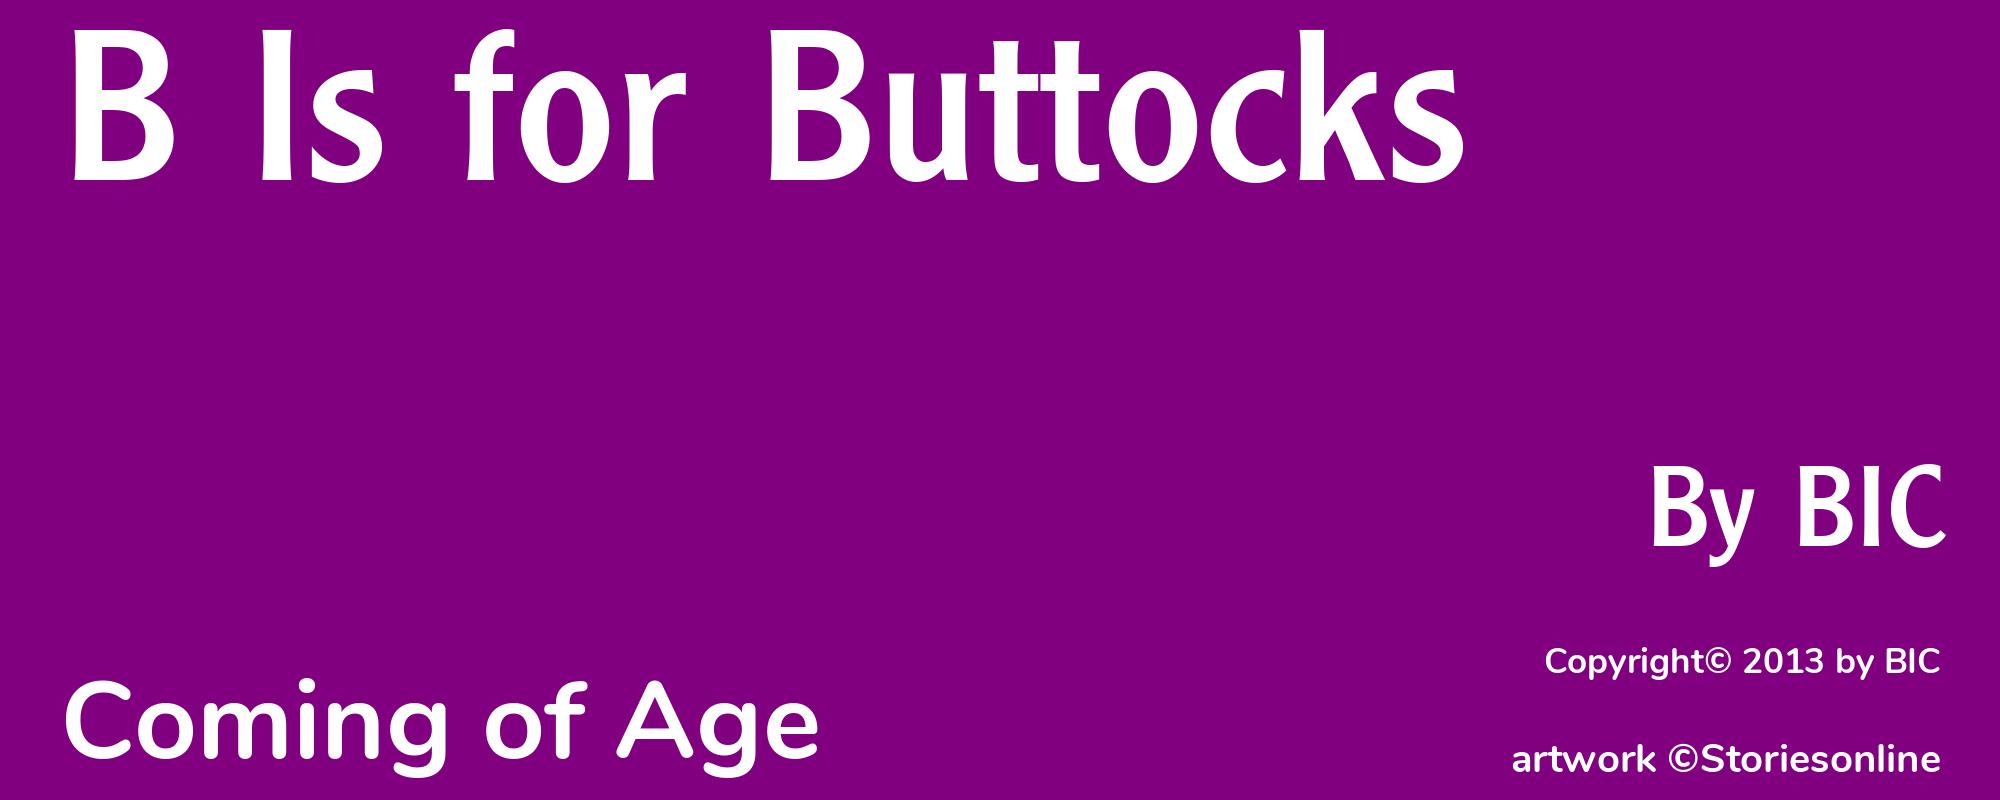 B Is for Buttocks - Cover